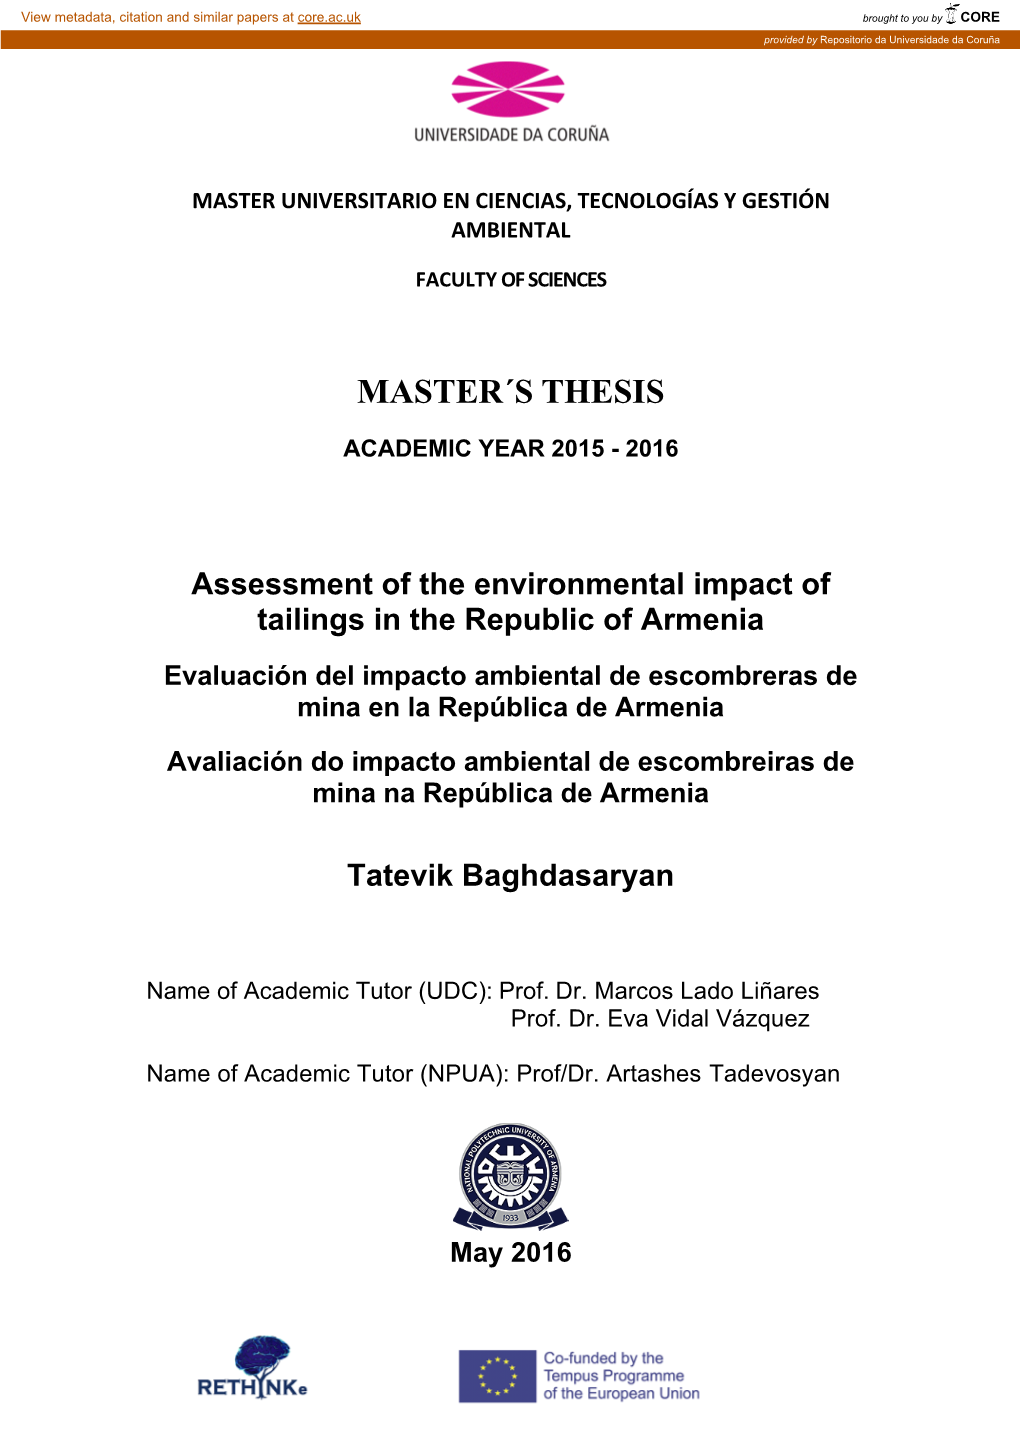 Assessment of the Environmental Impact of Tailings in the Republic Of